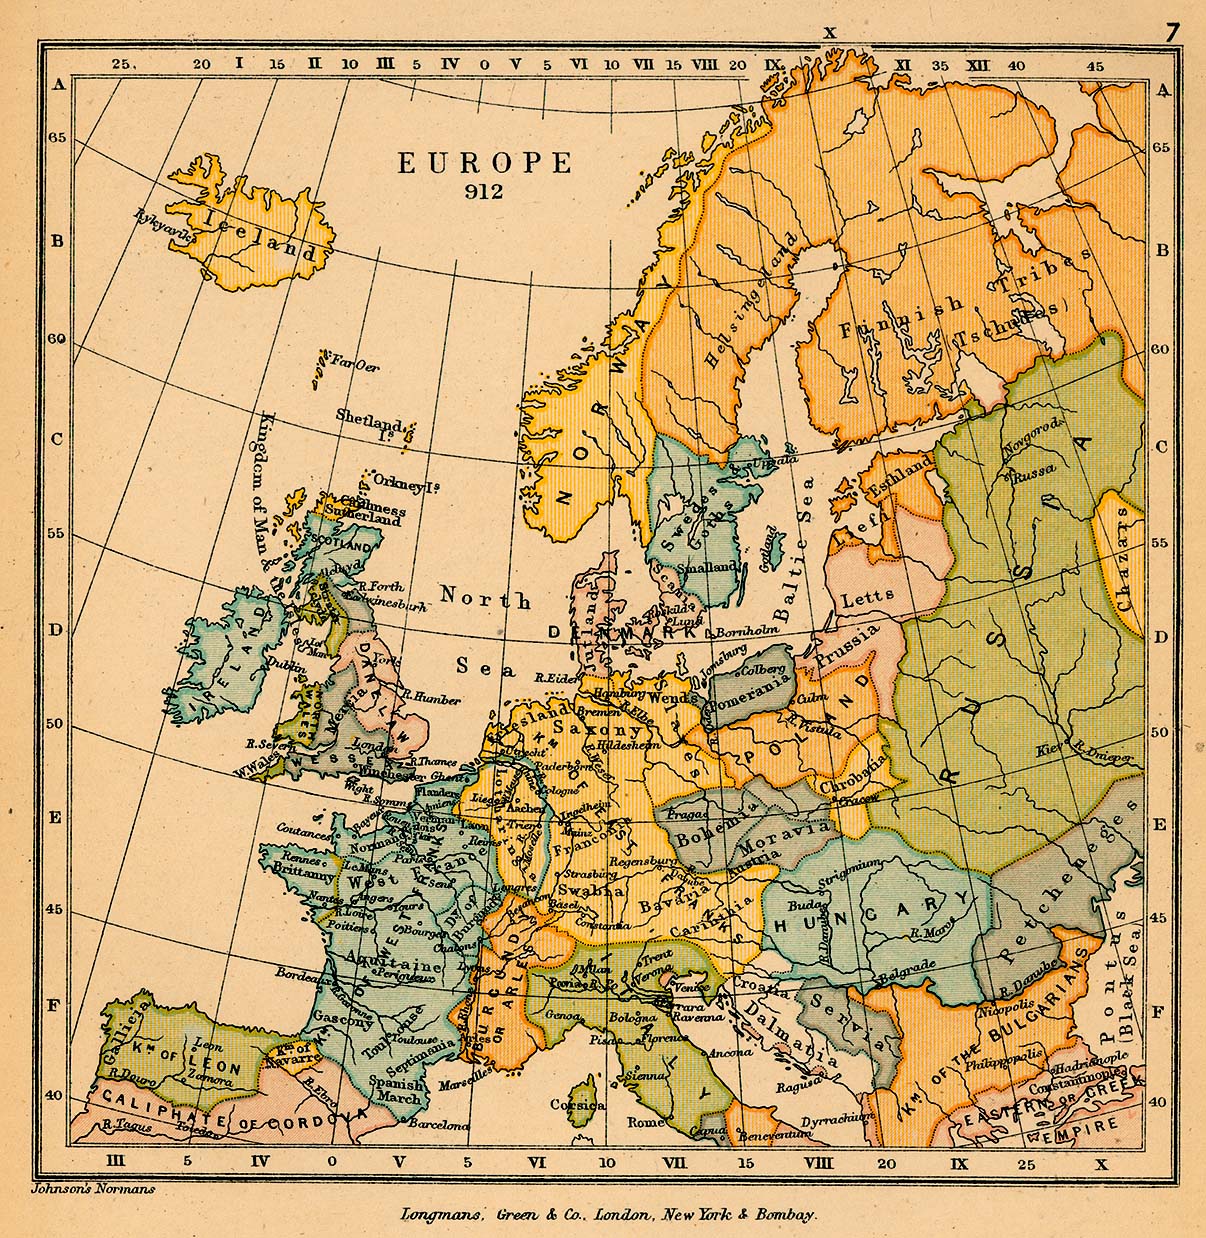 Map of Europe in 912